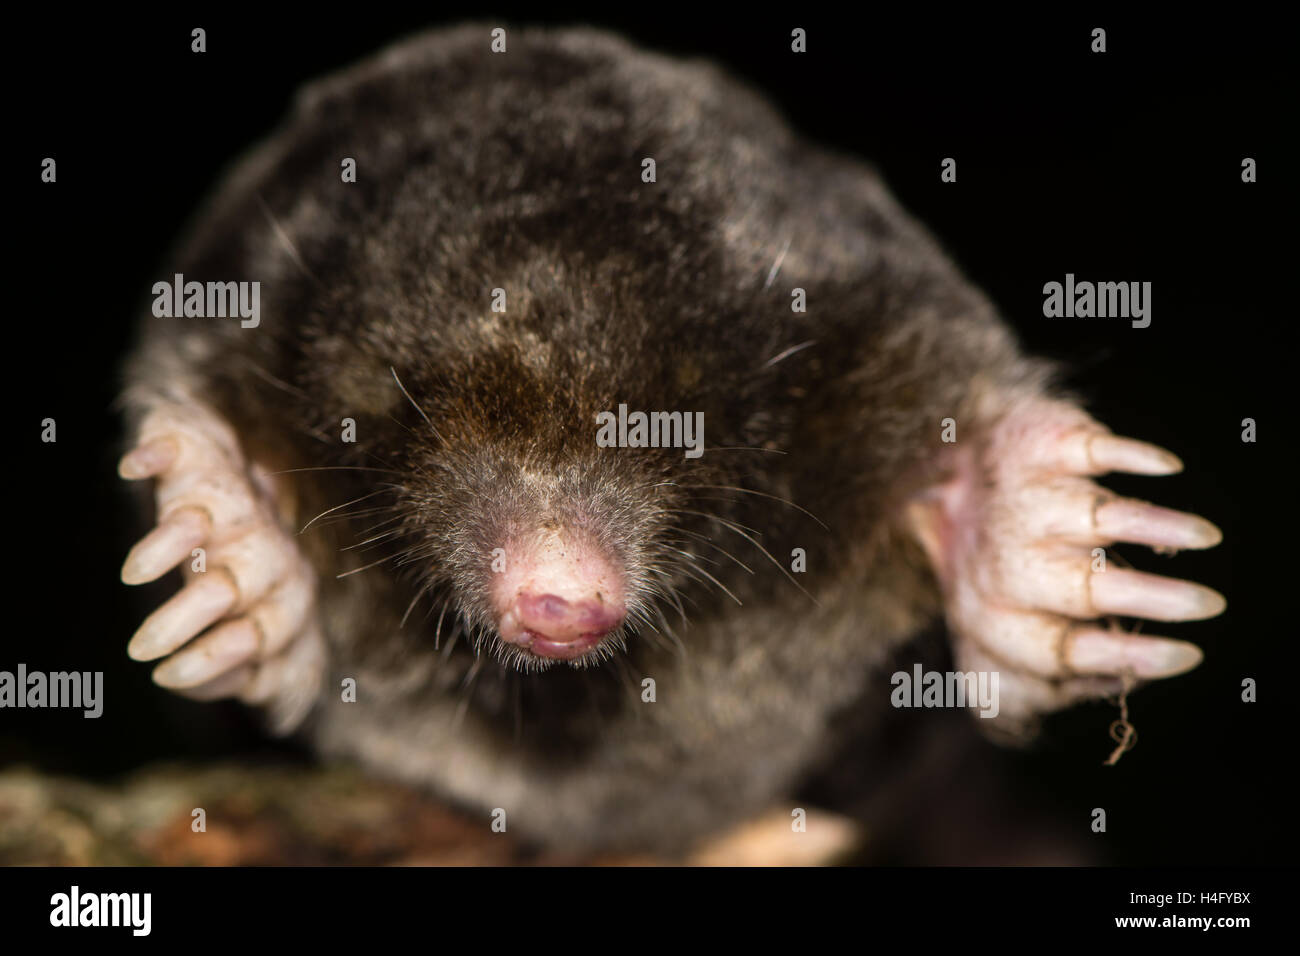 European mole (Talpa europaea) heads and front legs. Dead animal with focus on whiskers, seen from in front Stock Photo